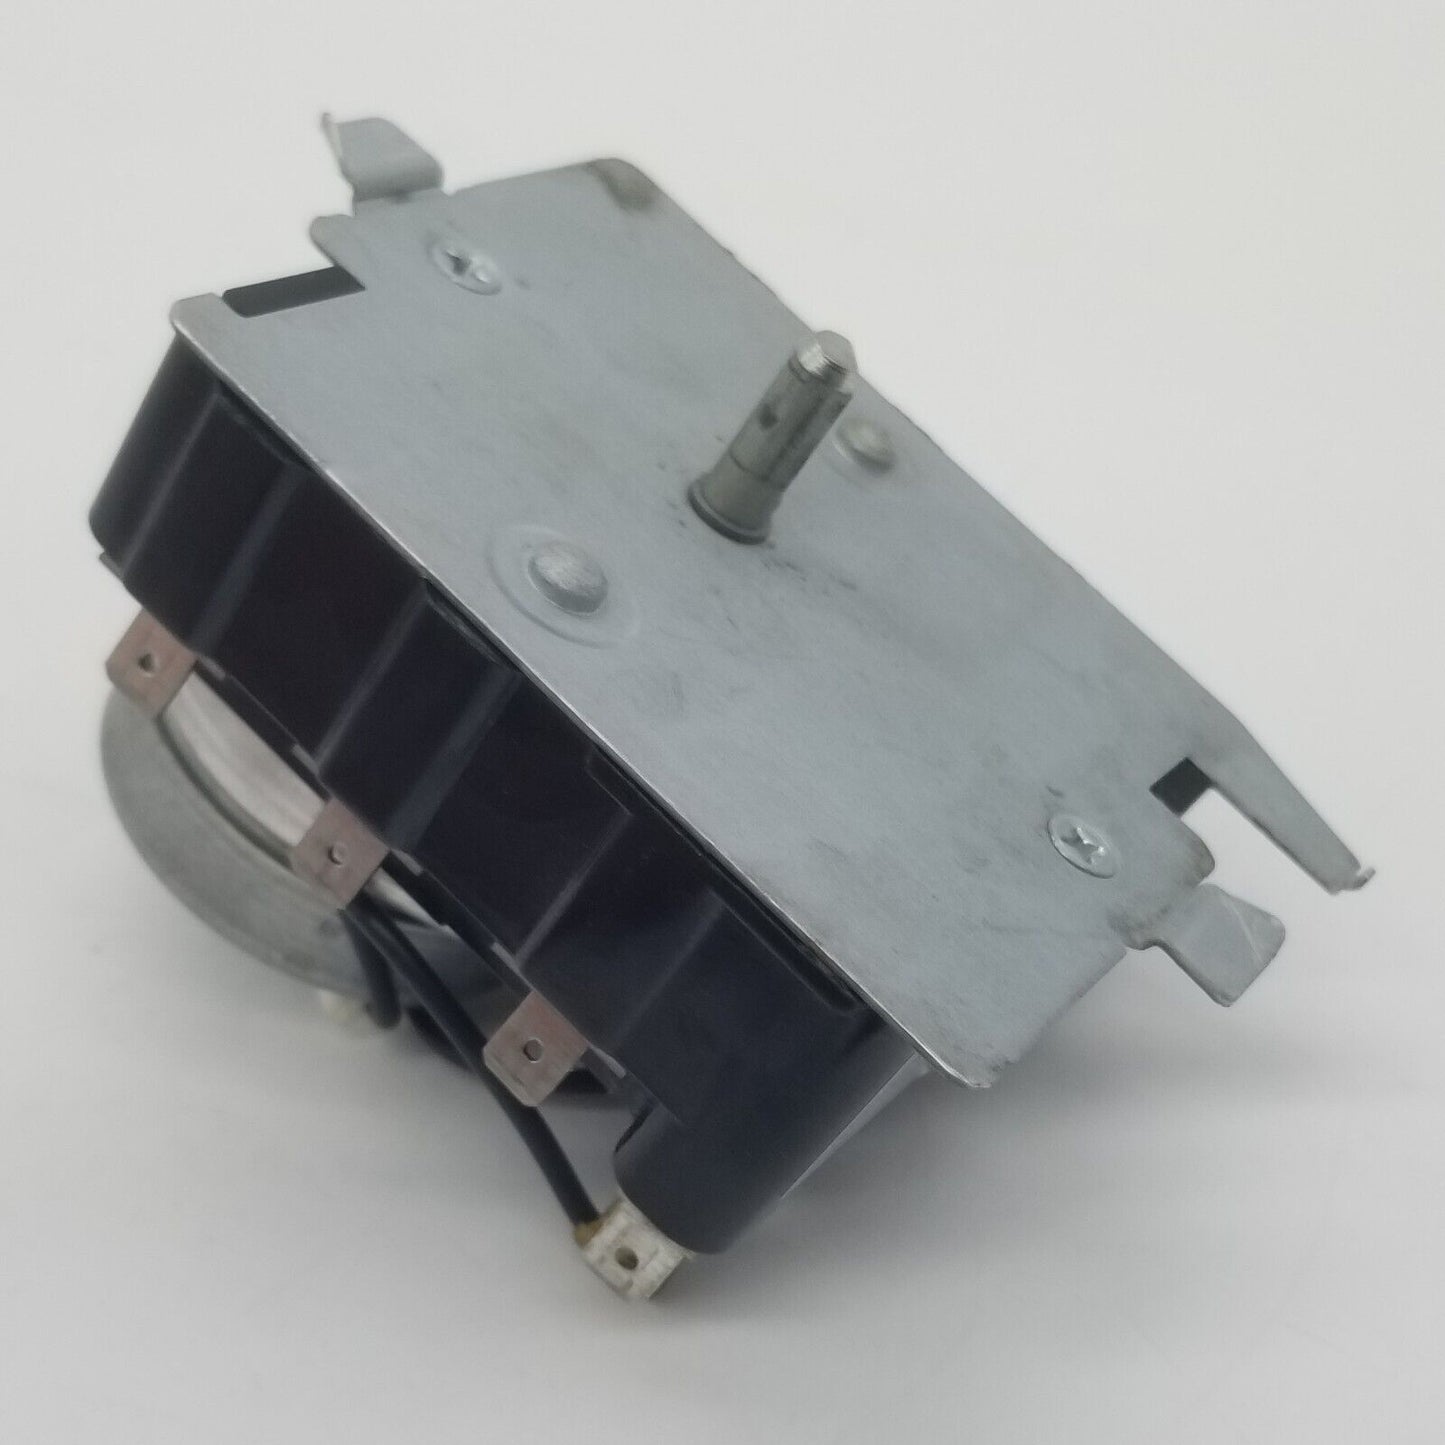 Genuine OEM Replacement for GE Dryer Timer 175D2308P011